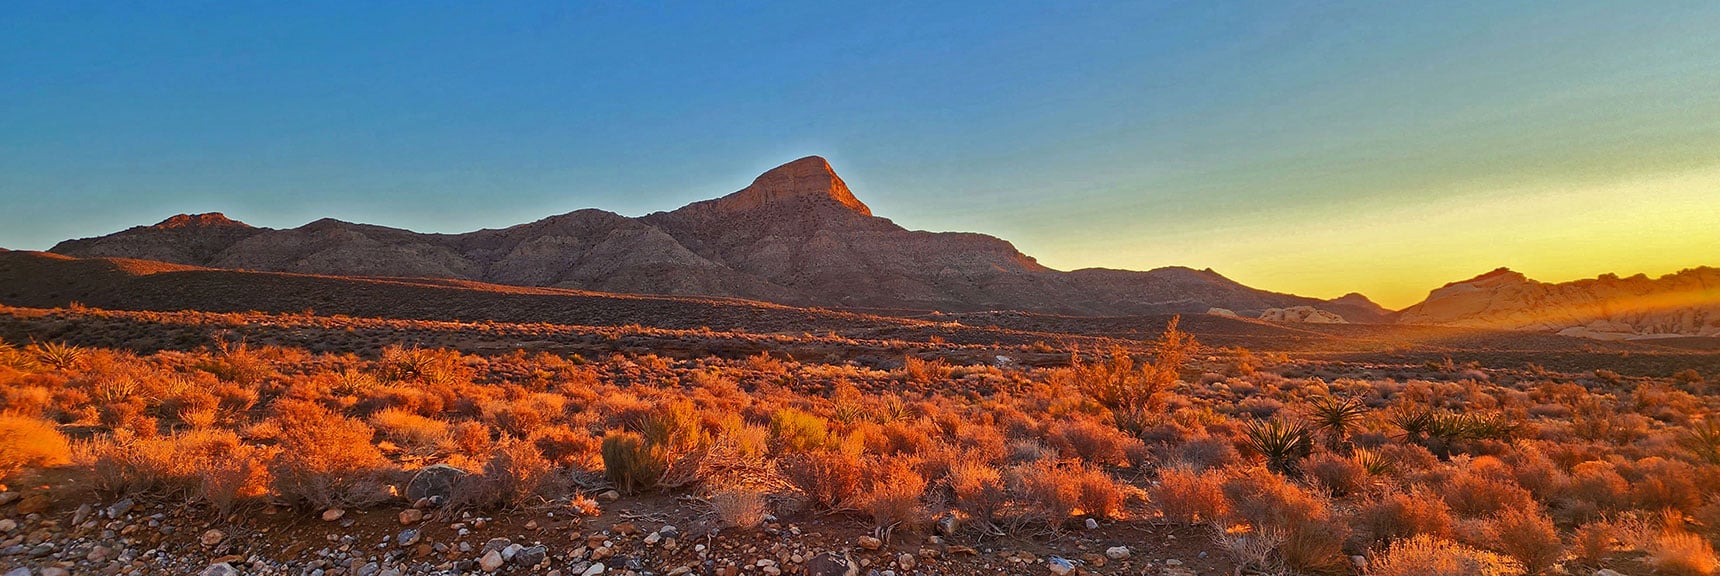 Turtlehead Peak Touched by First Light | White Rock Mountain Loop Trail | Red Rock Canyon, Nevada